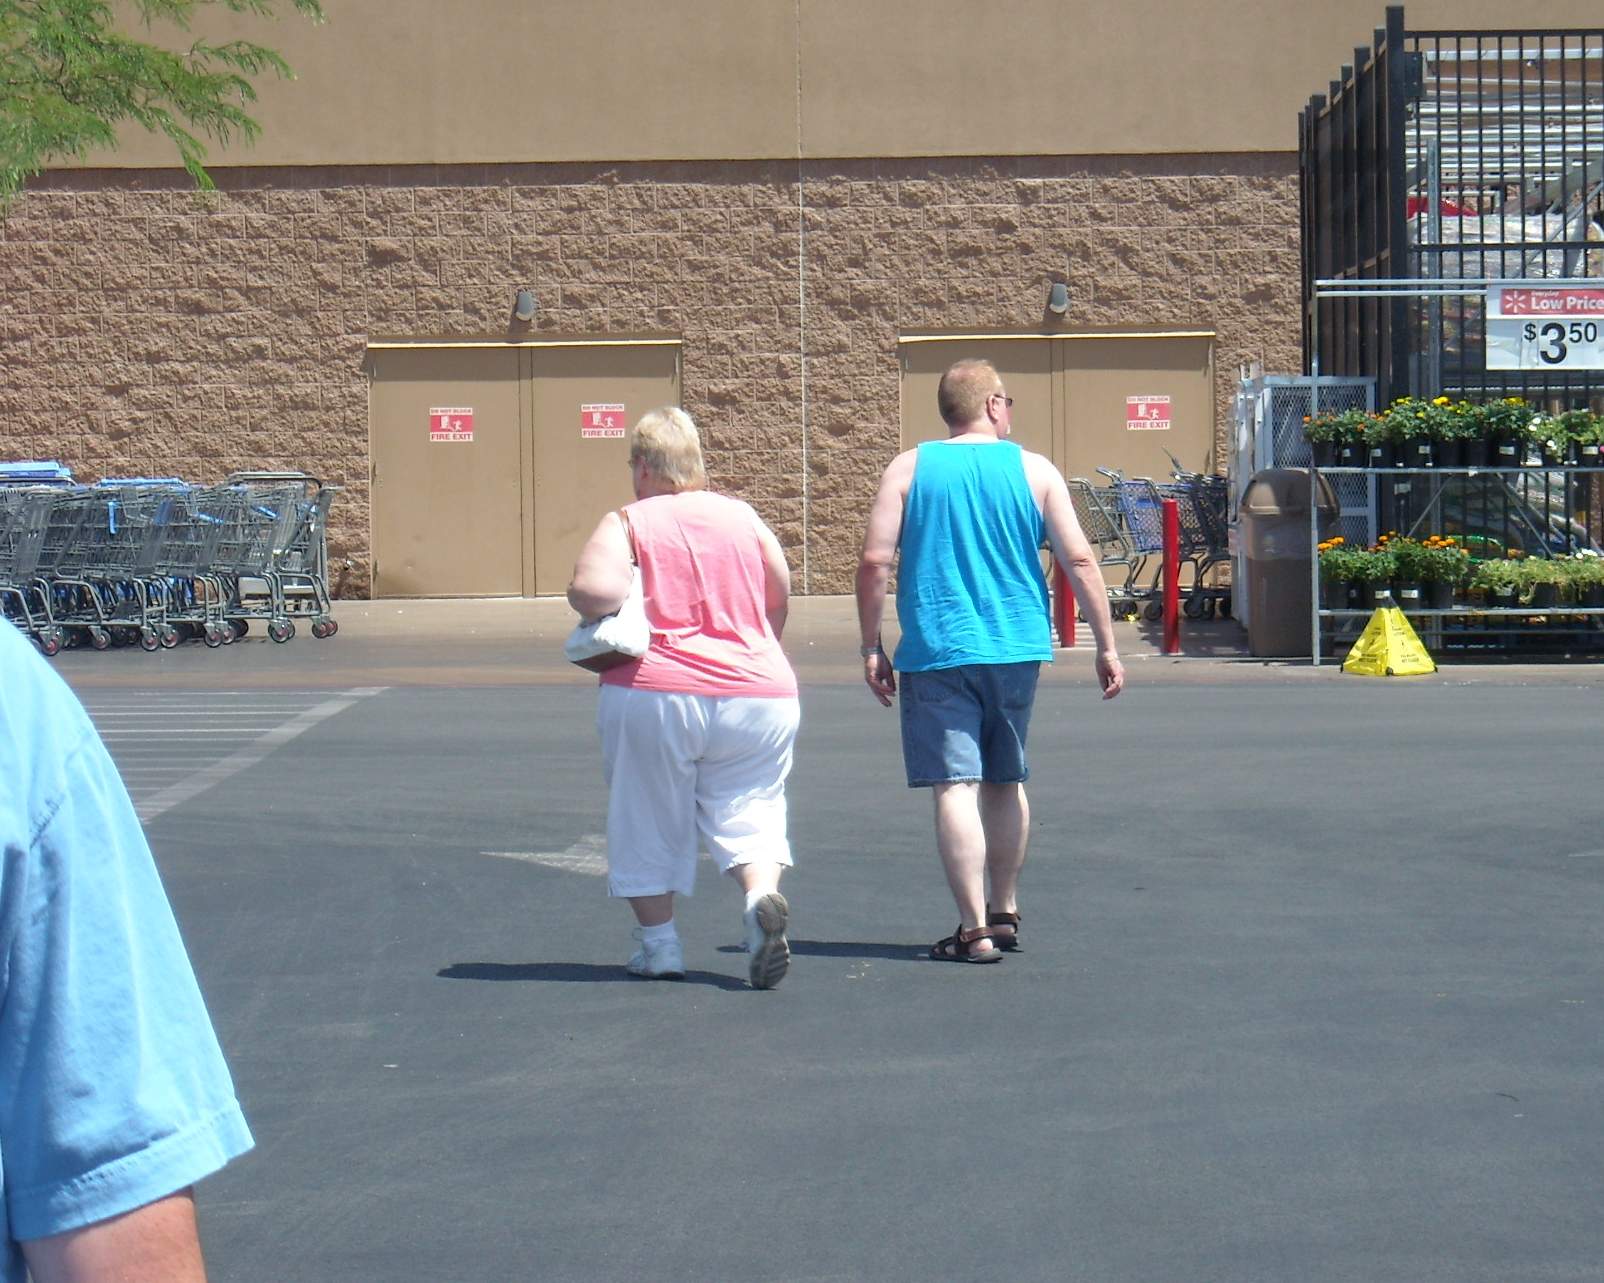 We found the way to Walmart in Pahrump, NV by following these folks.